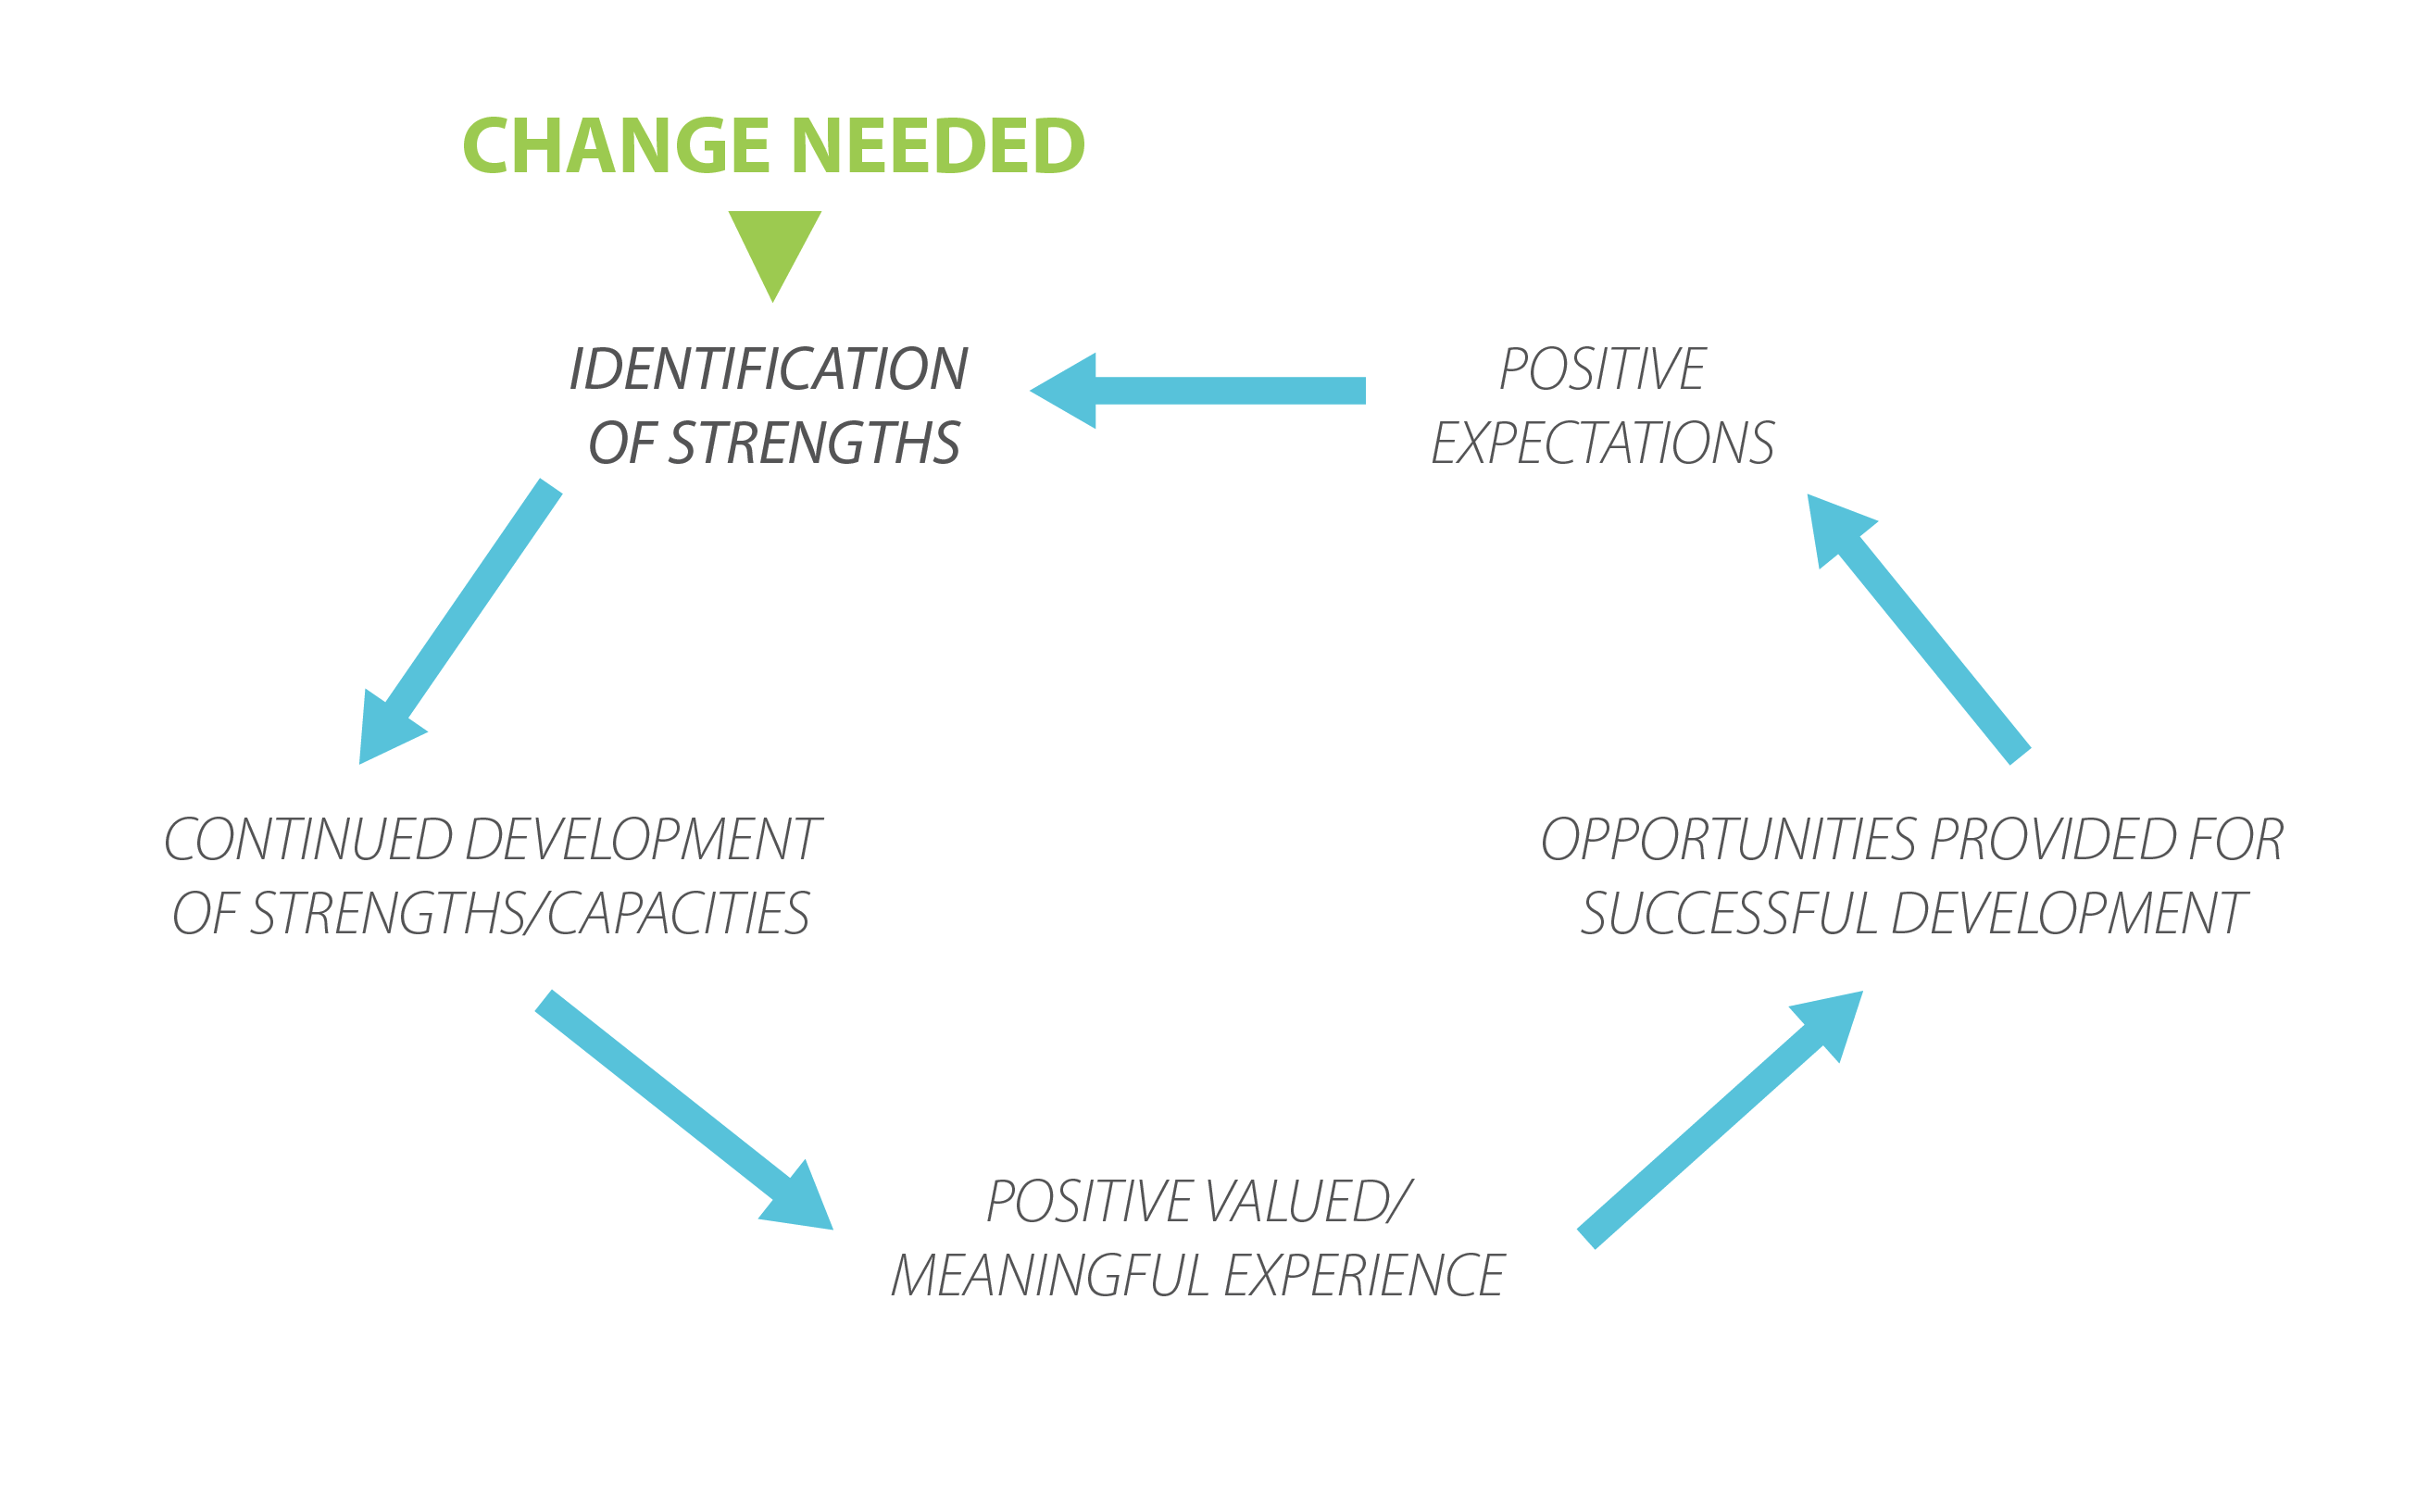 The strengths-based cycle